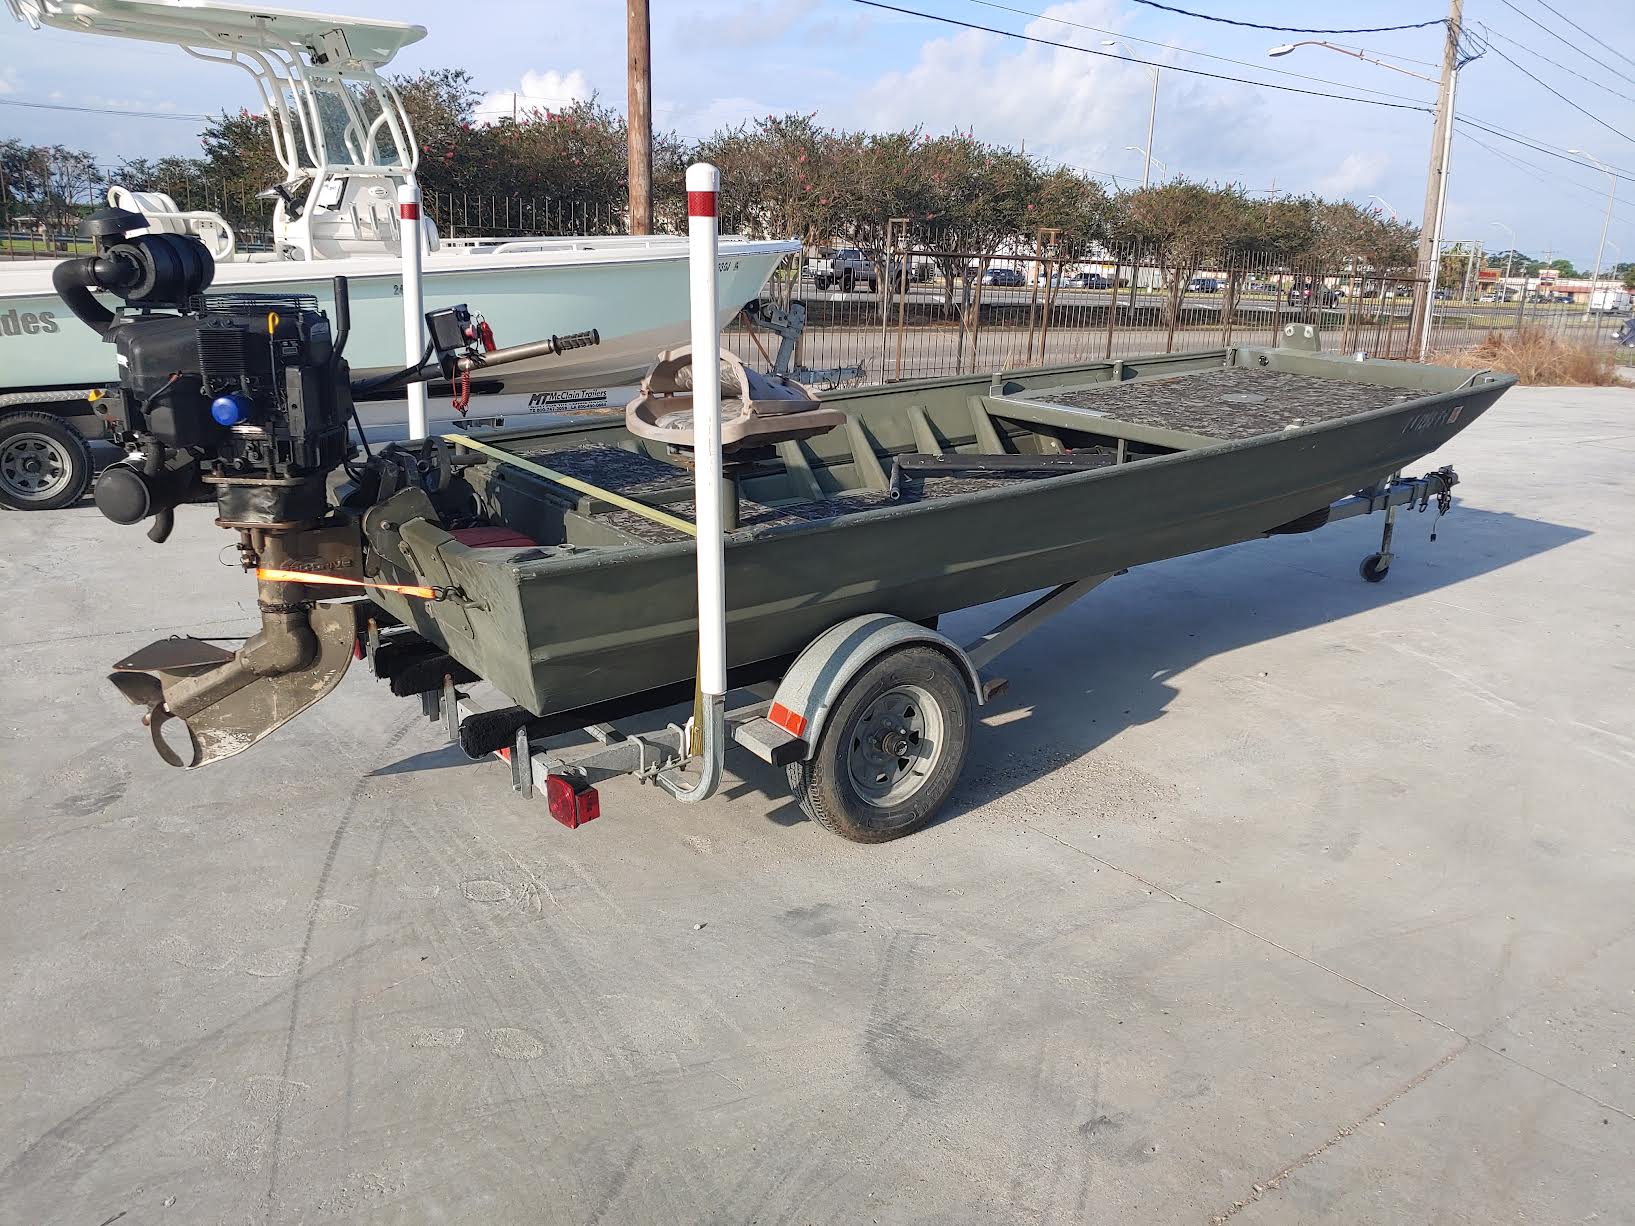 2006 Alweld boat for sale, model of the boat is 16Ft & Image # 2 of 4